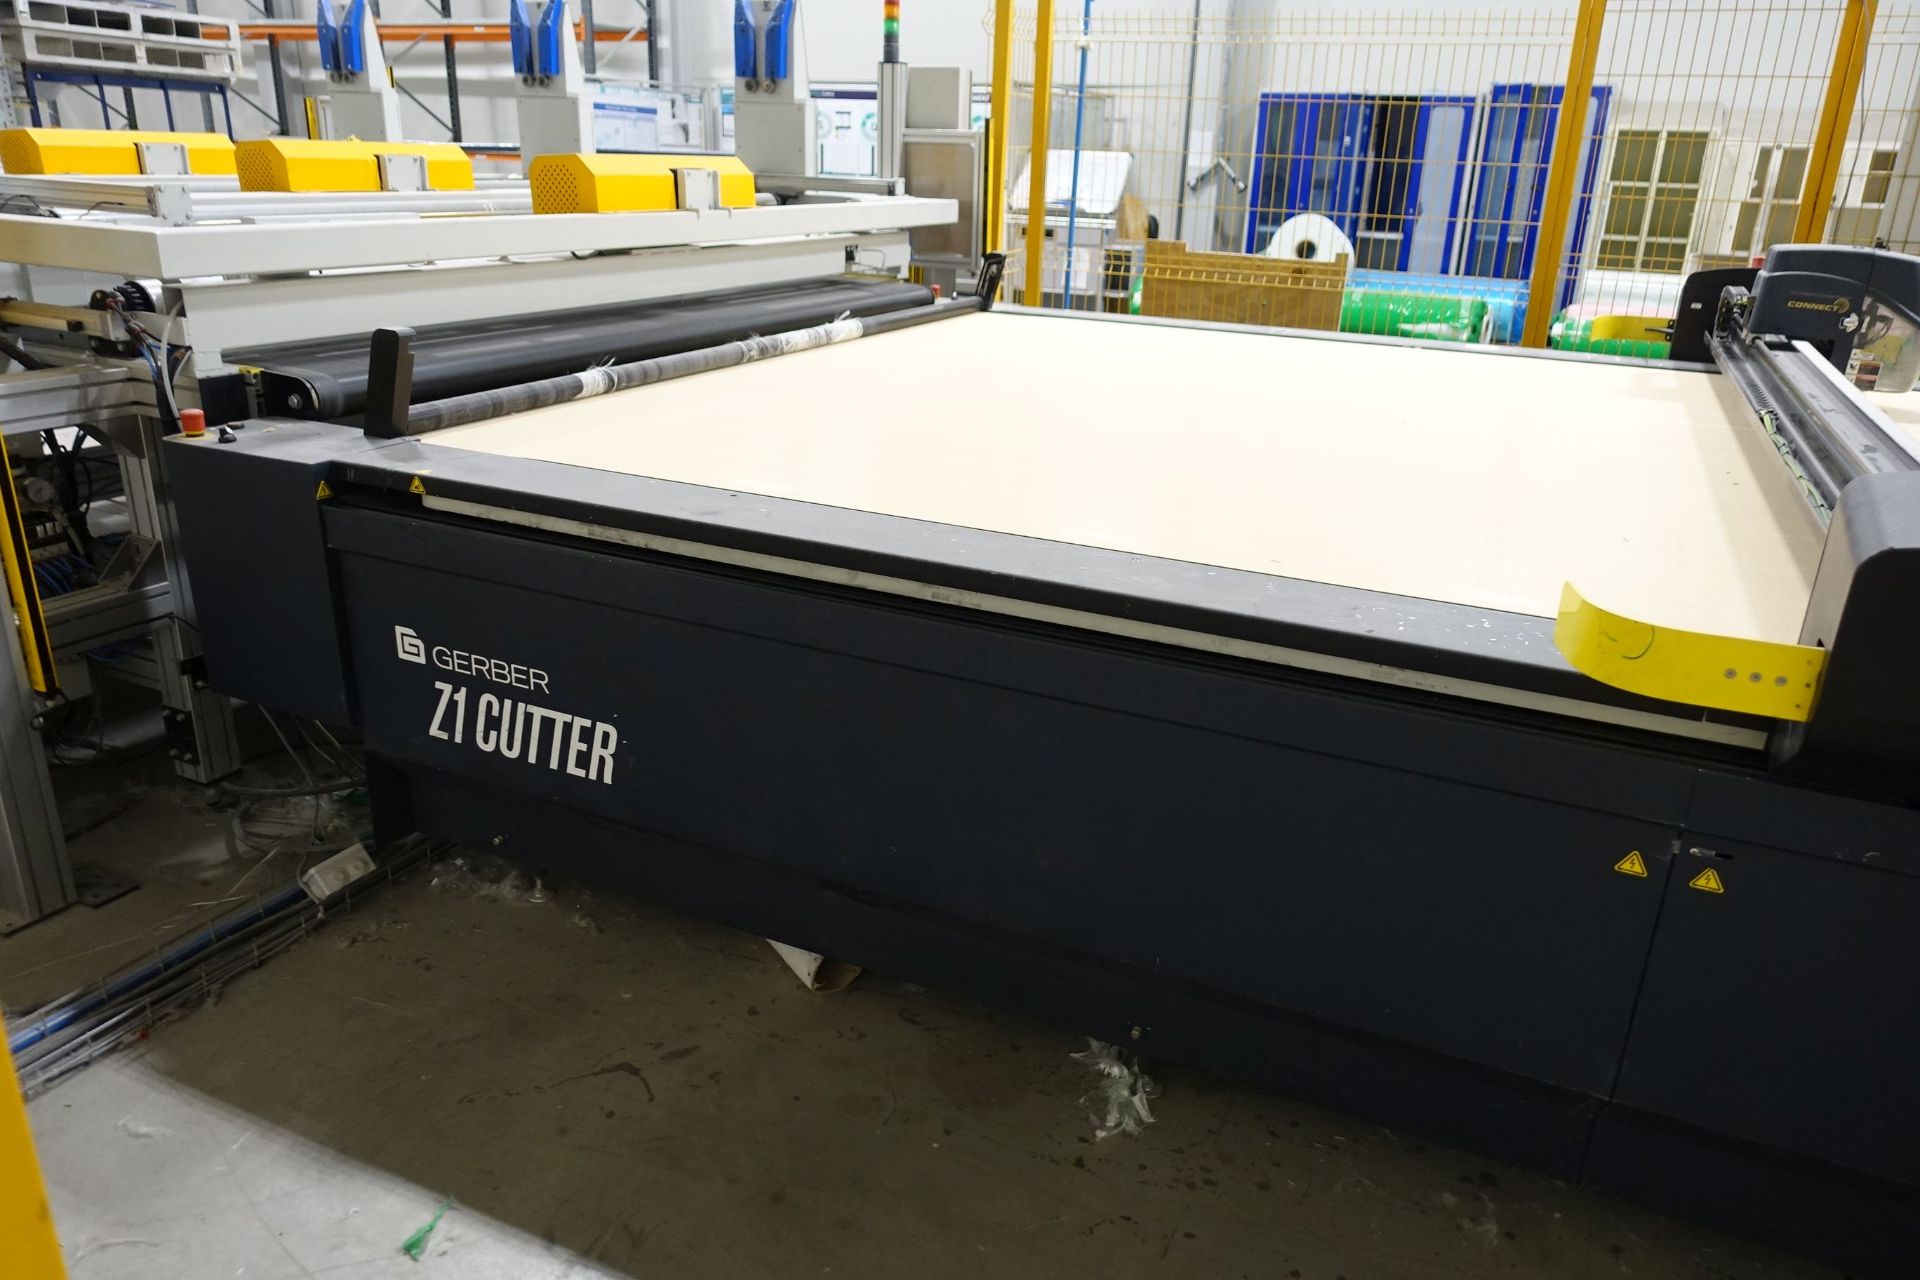 GERBER 'Z1 CUTTER' Materials Dry Cutting Machine, 6-Roll Feed Stand, CC Sistemas '282' Feeder - Image 21 of 39